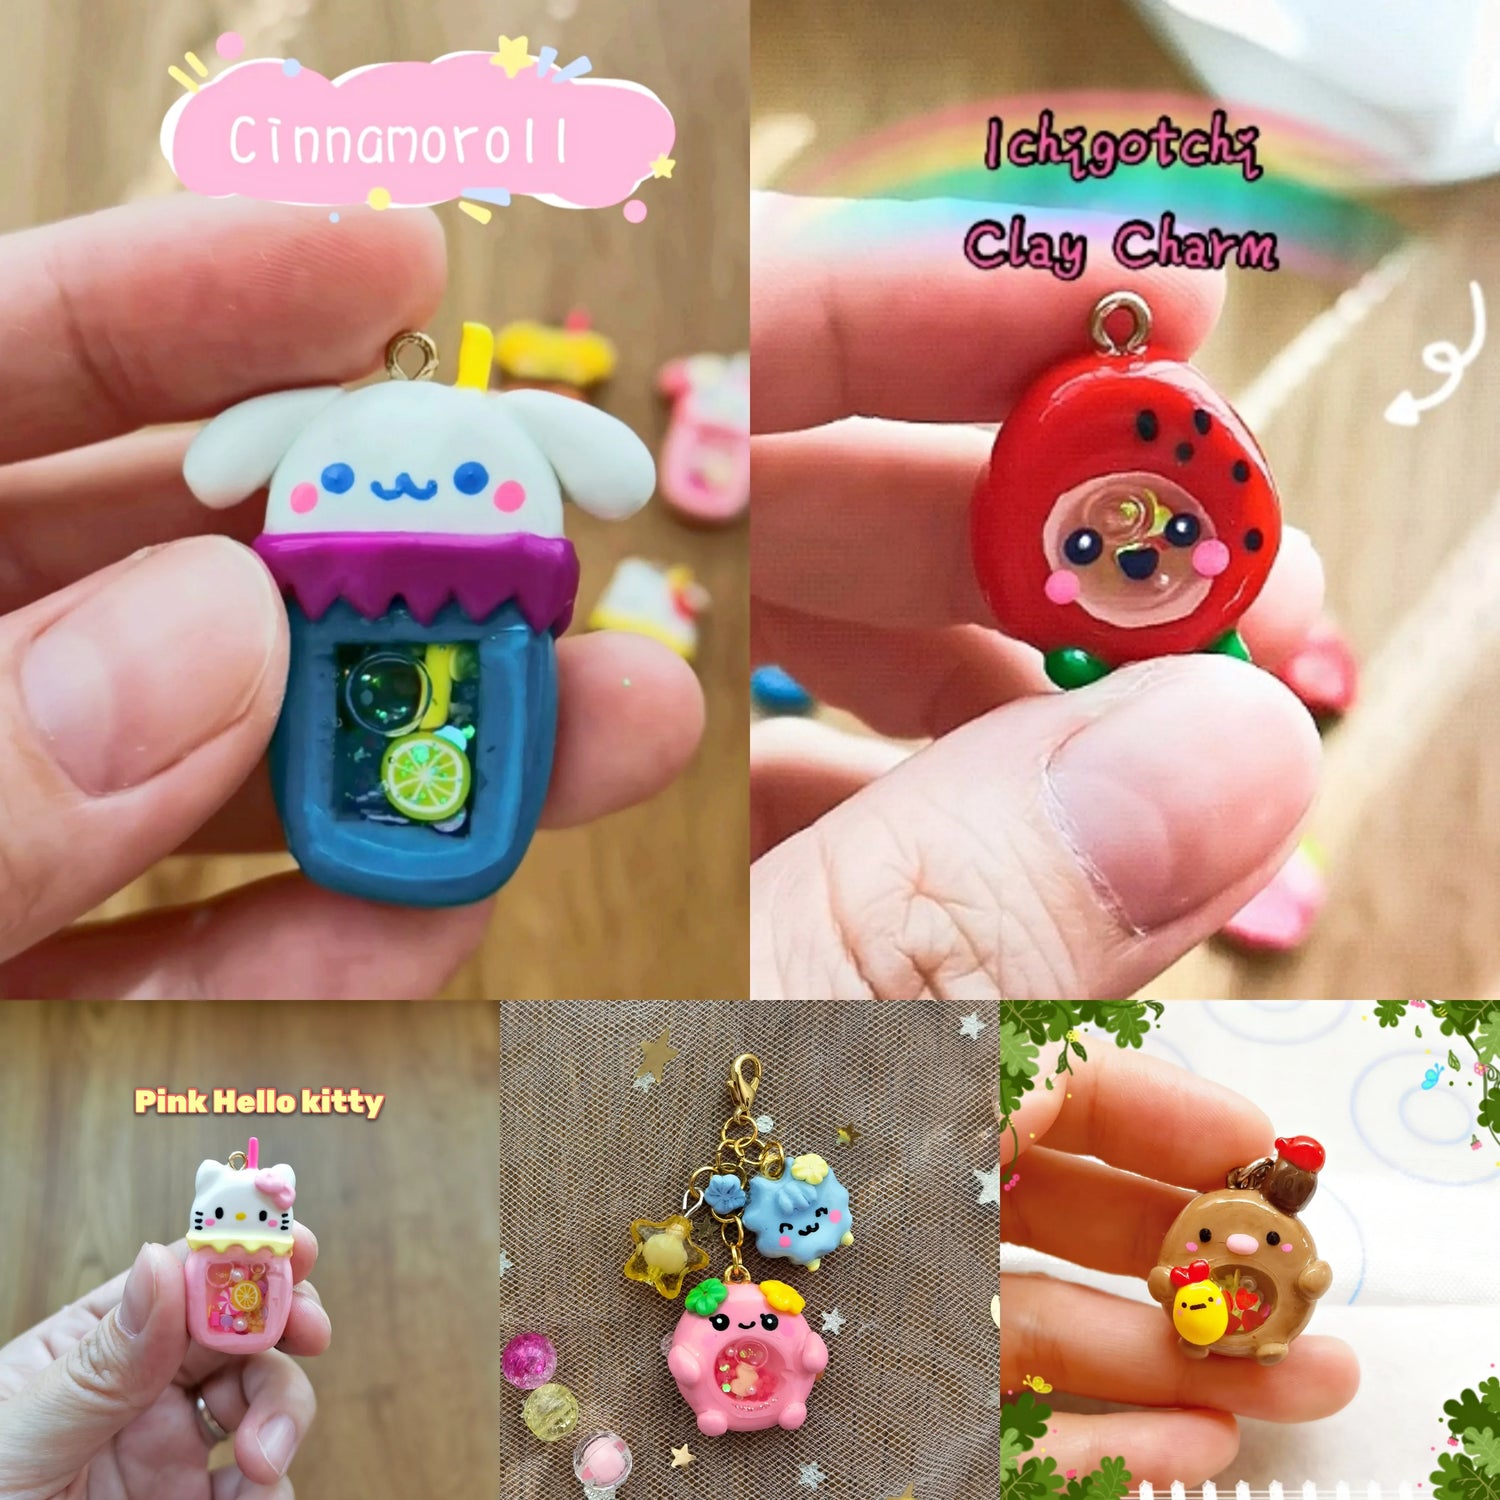 Handcrafted Clay, Charms, Accessories